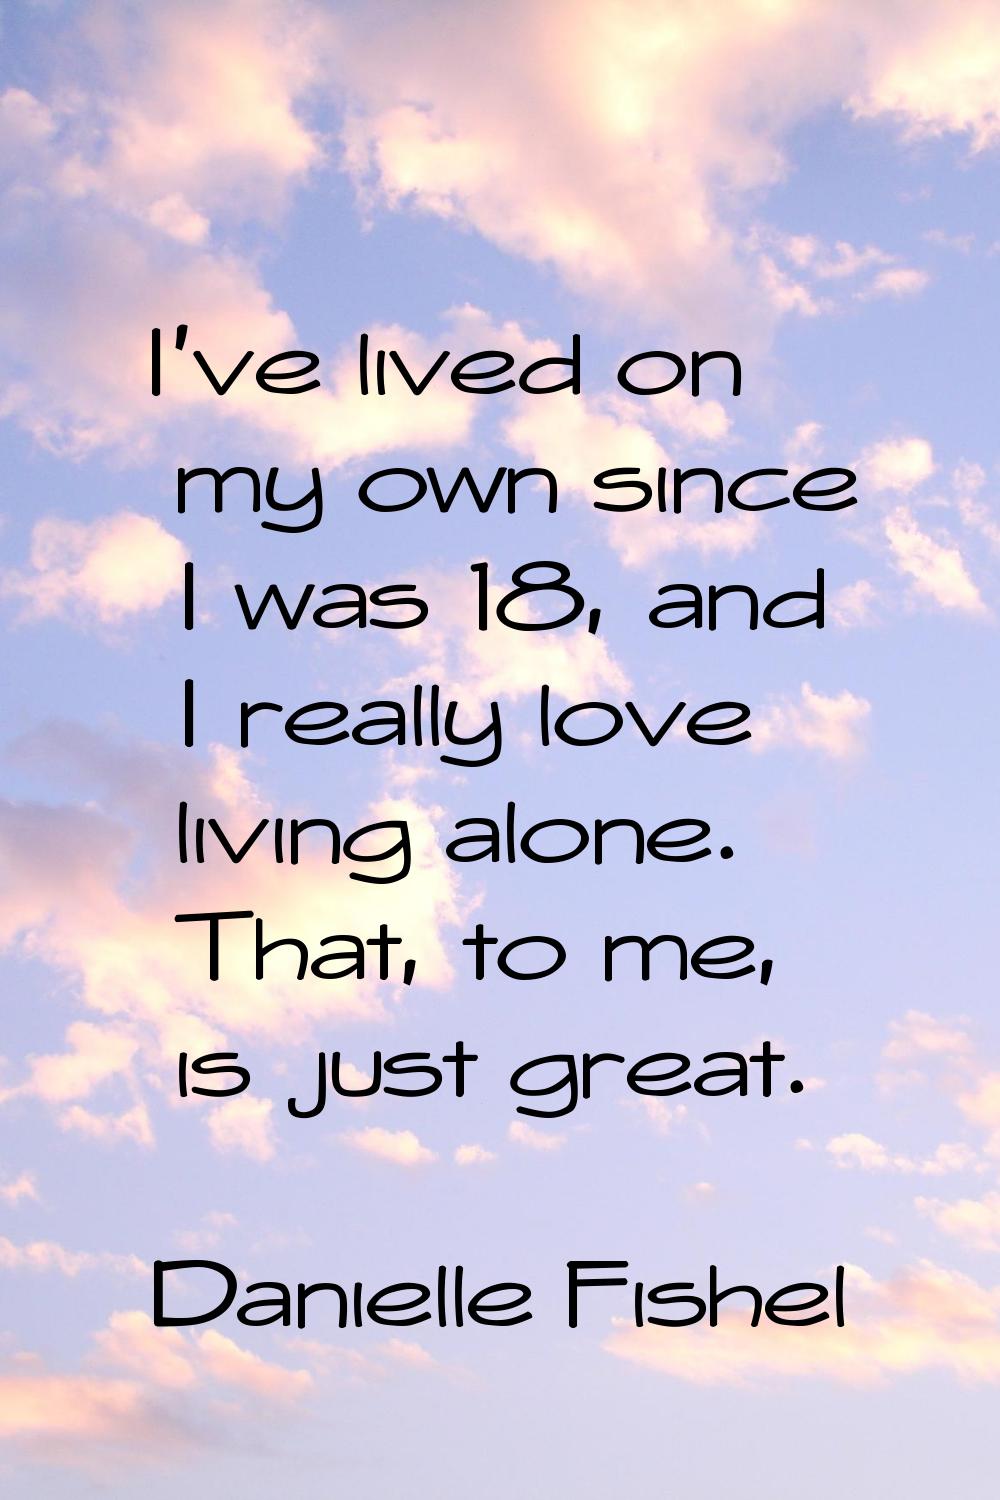 I've lived on my own since I was 18, and I really love living alone. That, to me, is just great.